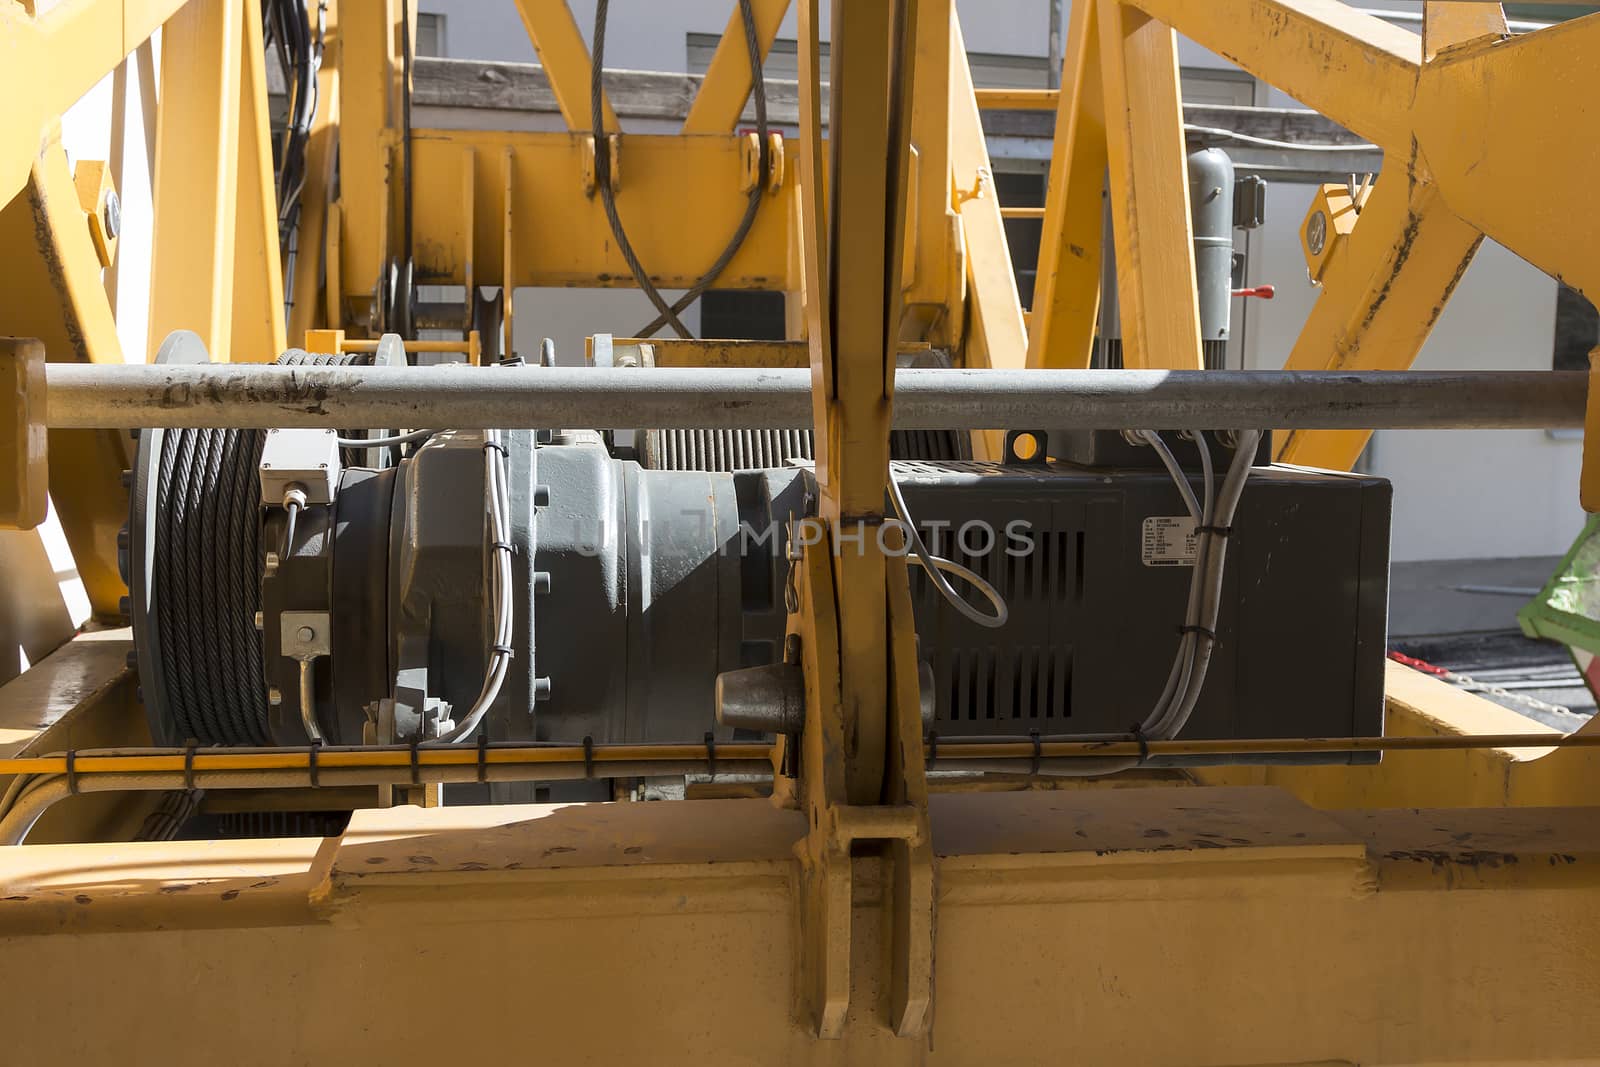 A close up of the enginge on a crane